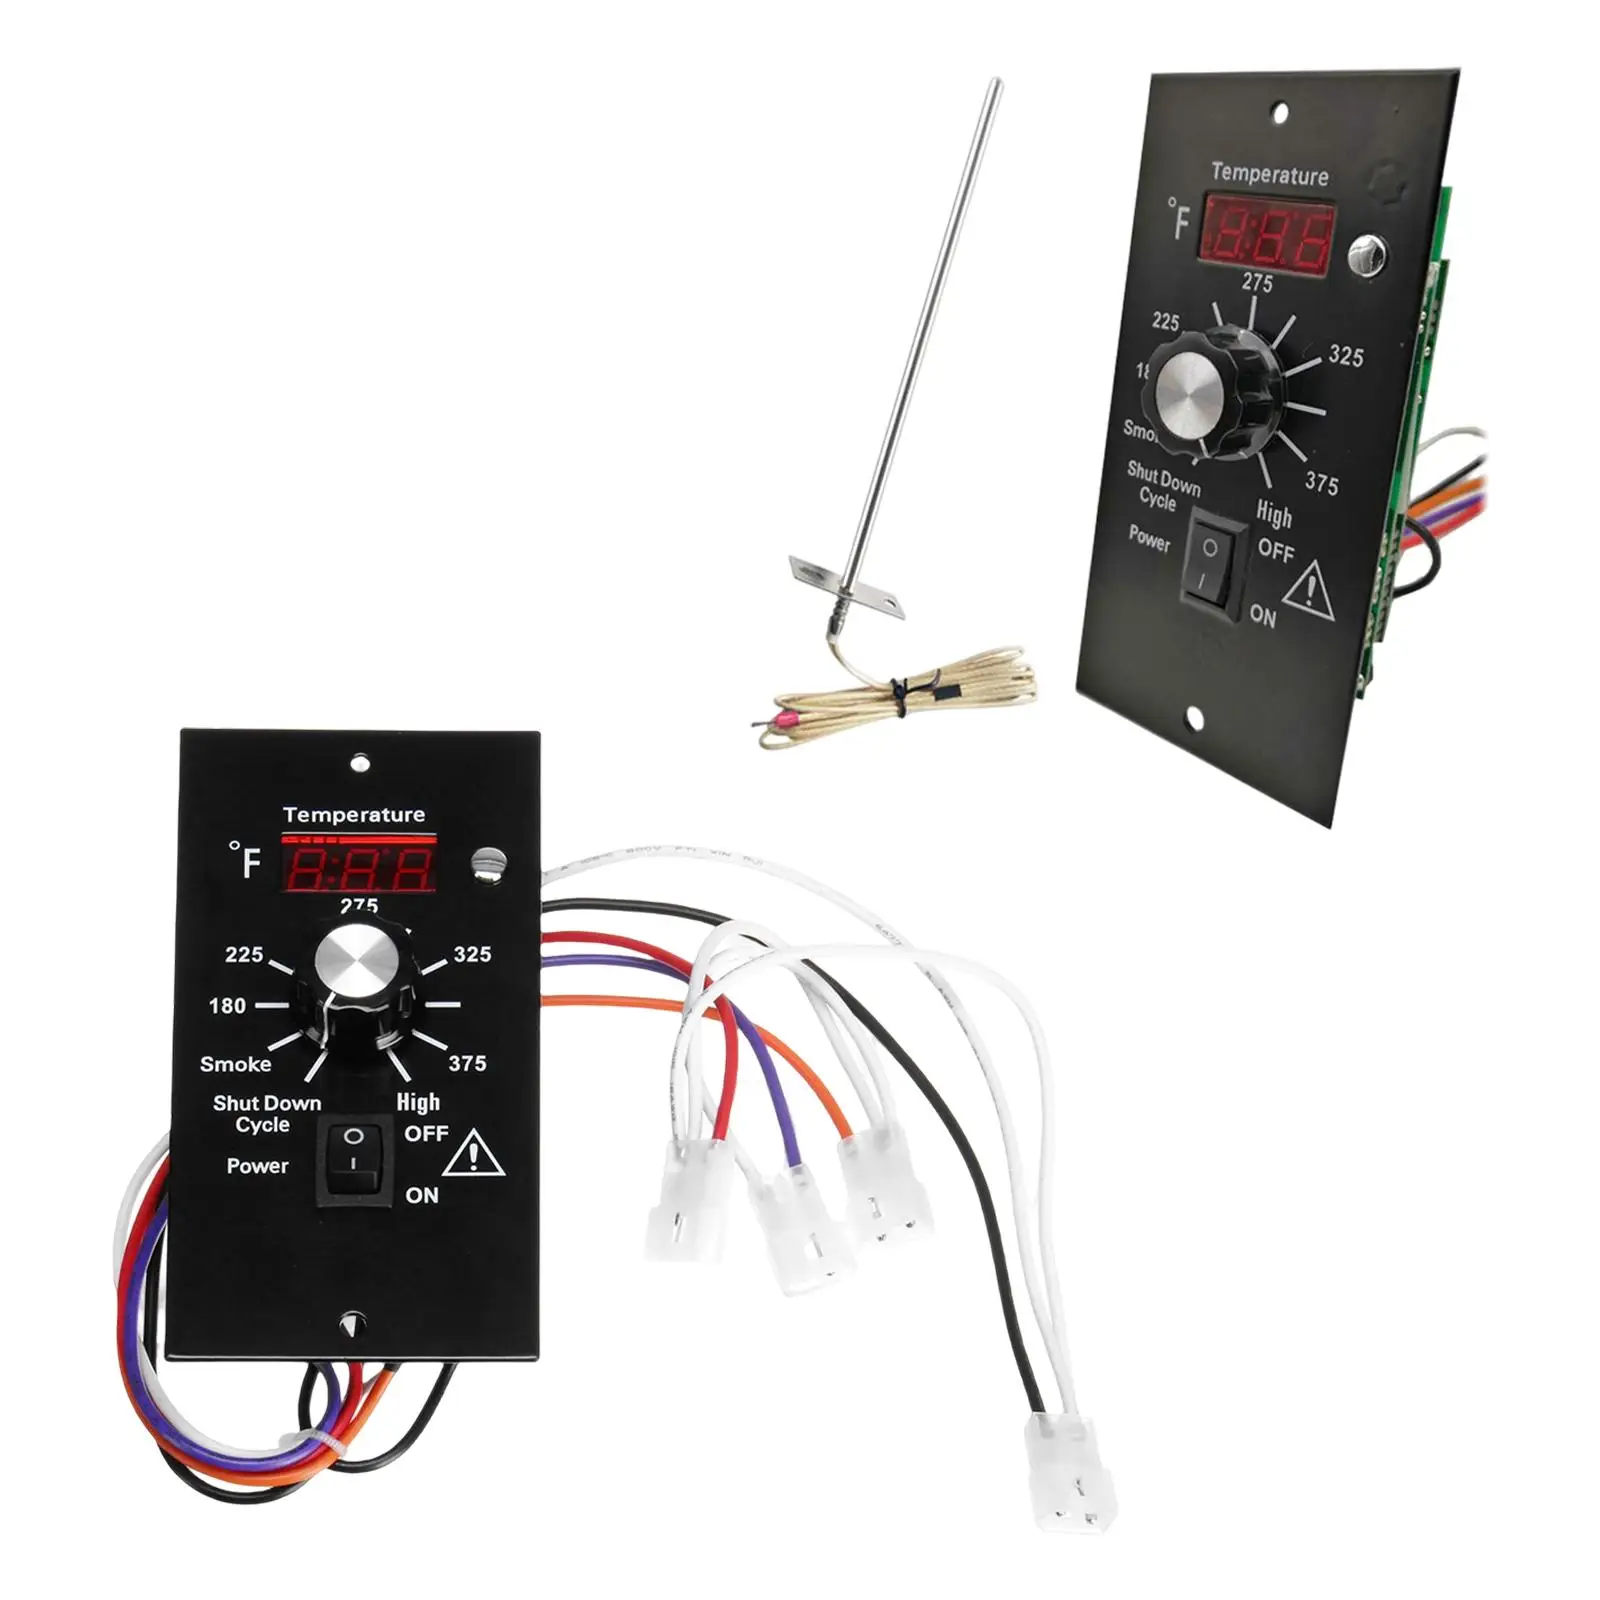 Digital Thermostat Control Panel Kit Temperature Controller for Kitchen Cooking BBQ